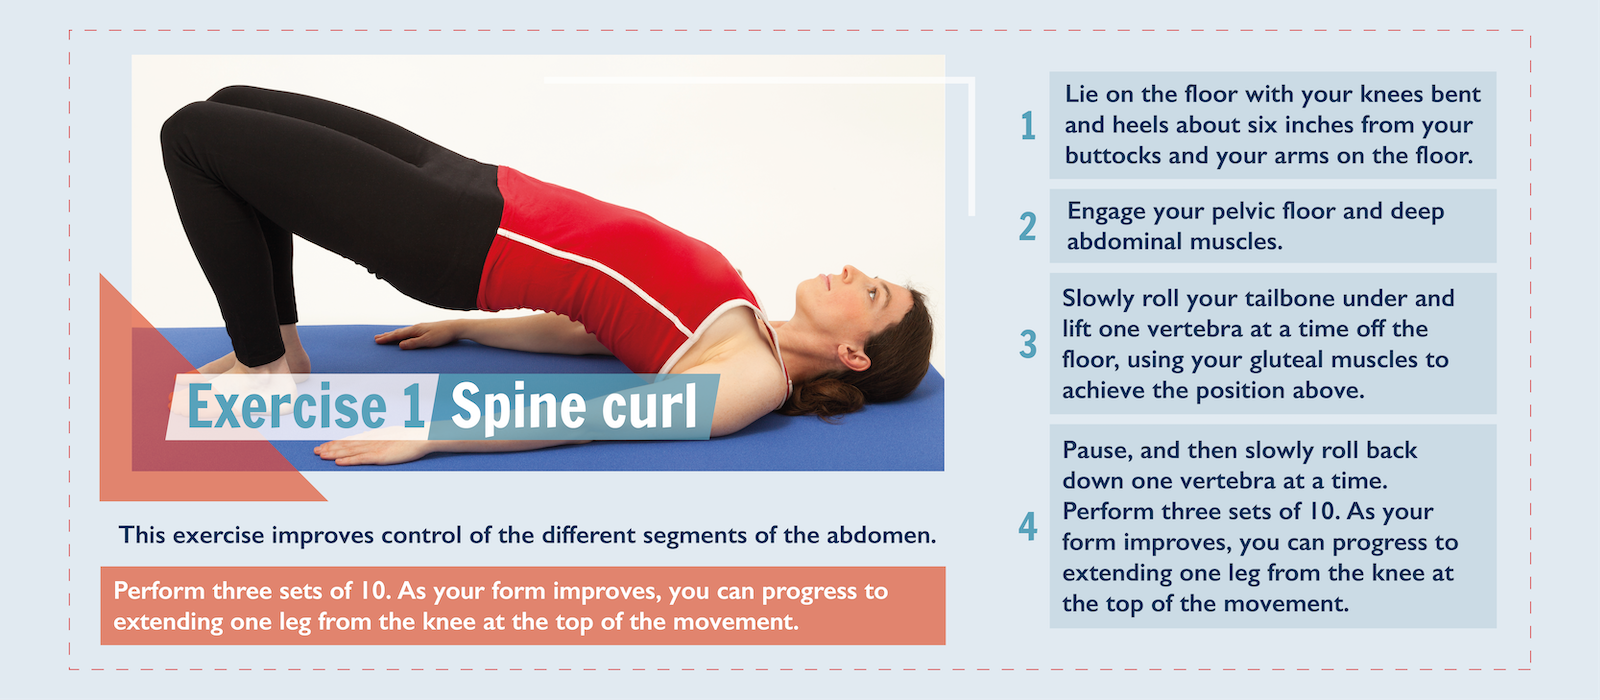 Exercise 1: A graphic explaining the Spine curl position. There is a photograph of a lady laying on a mat with her two feet on the ground, knees bent and her hips lifted. Her arms lay flat on the floor. This exercise improves control of the different segments of the abdomen. Step one: Lie on the floor with your knees bent and heels about six inches from your buttocks and your arms on the floor. Step two: Engage your pelvic floor and deep abdominal muscles. Step three: Slowly roll your tailbone under and lift one vertebra at a time off the floor, using your gluteal muscles to achieve the position above. Step four: Pause, and then slowly roll back down one vertebra at a time. Perform three sets of 10. As your form improves, you can progress to extending one leg from the knee at the top of the movement.